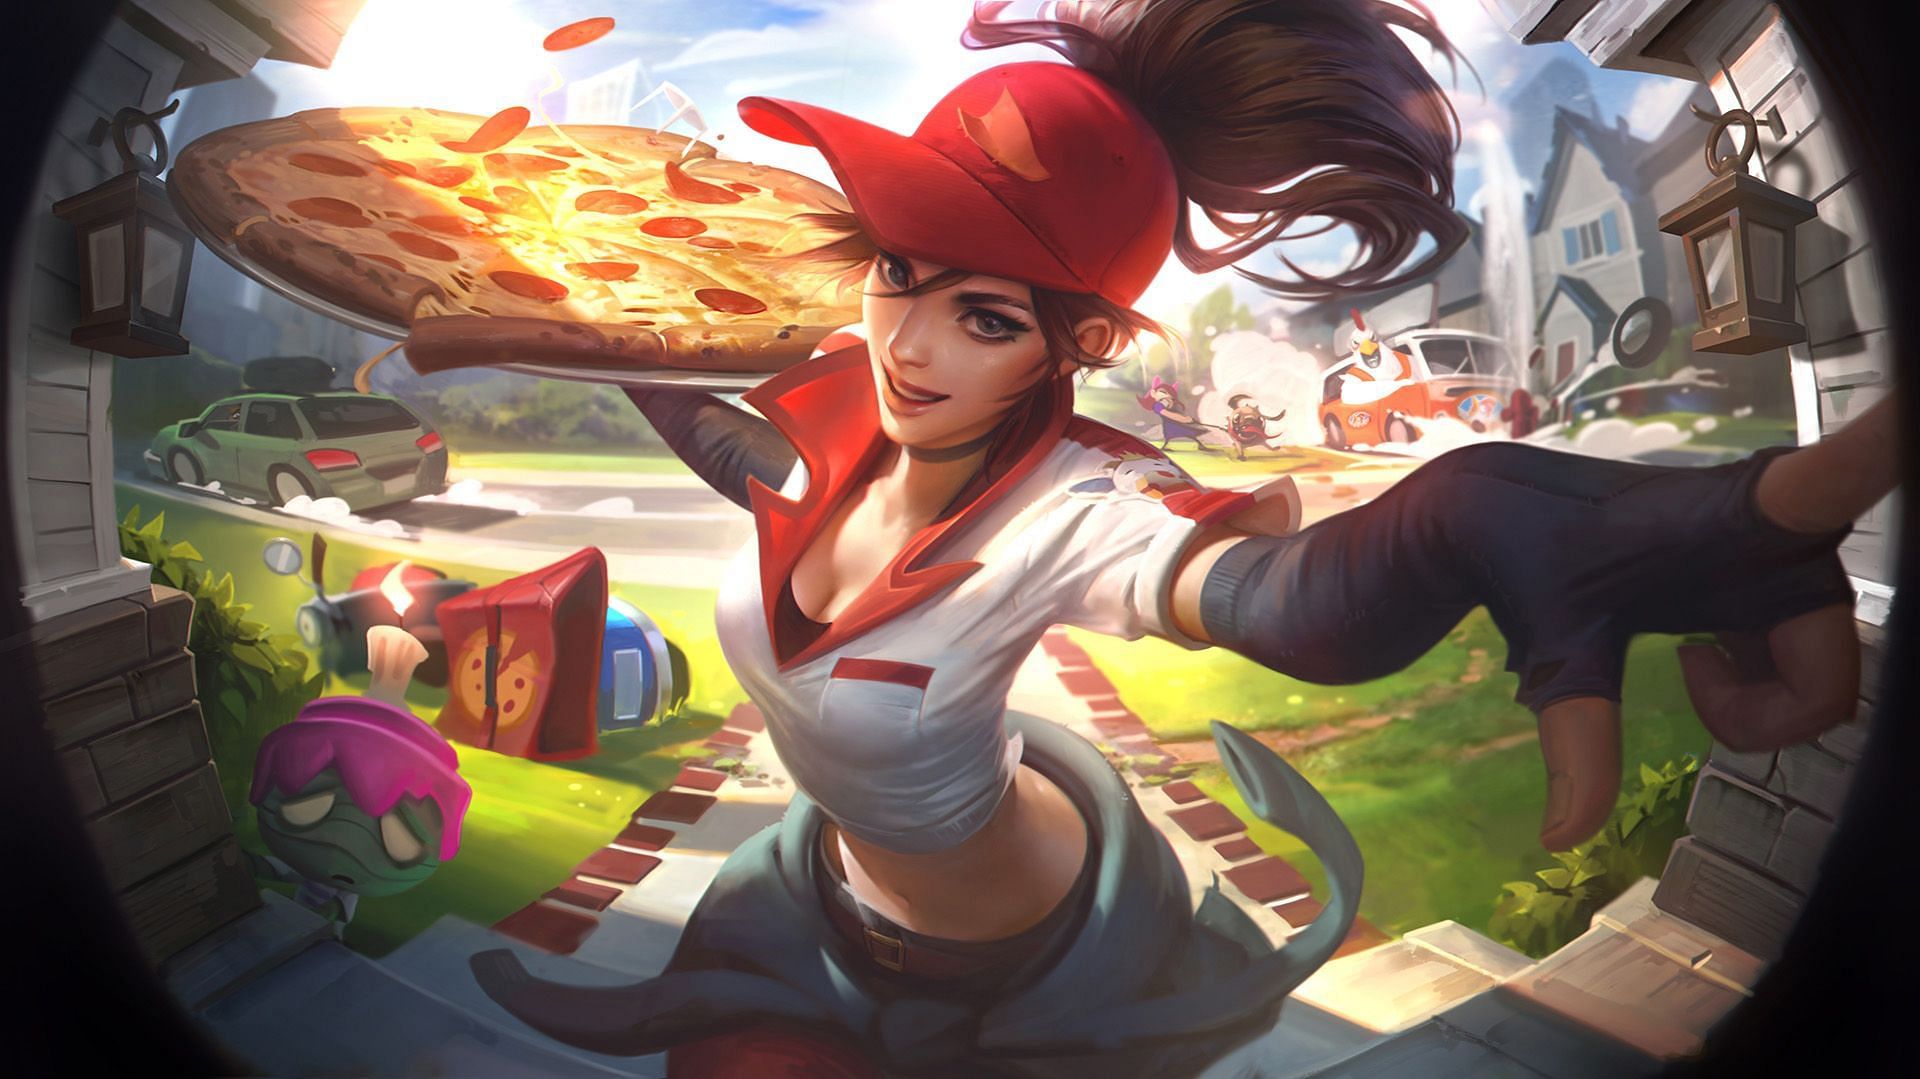 League of Legends: Quick gameplay thoughts (Image via Riot Games)